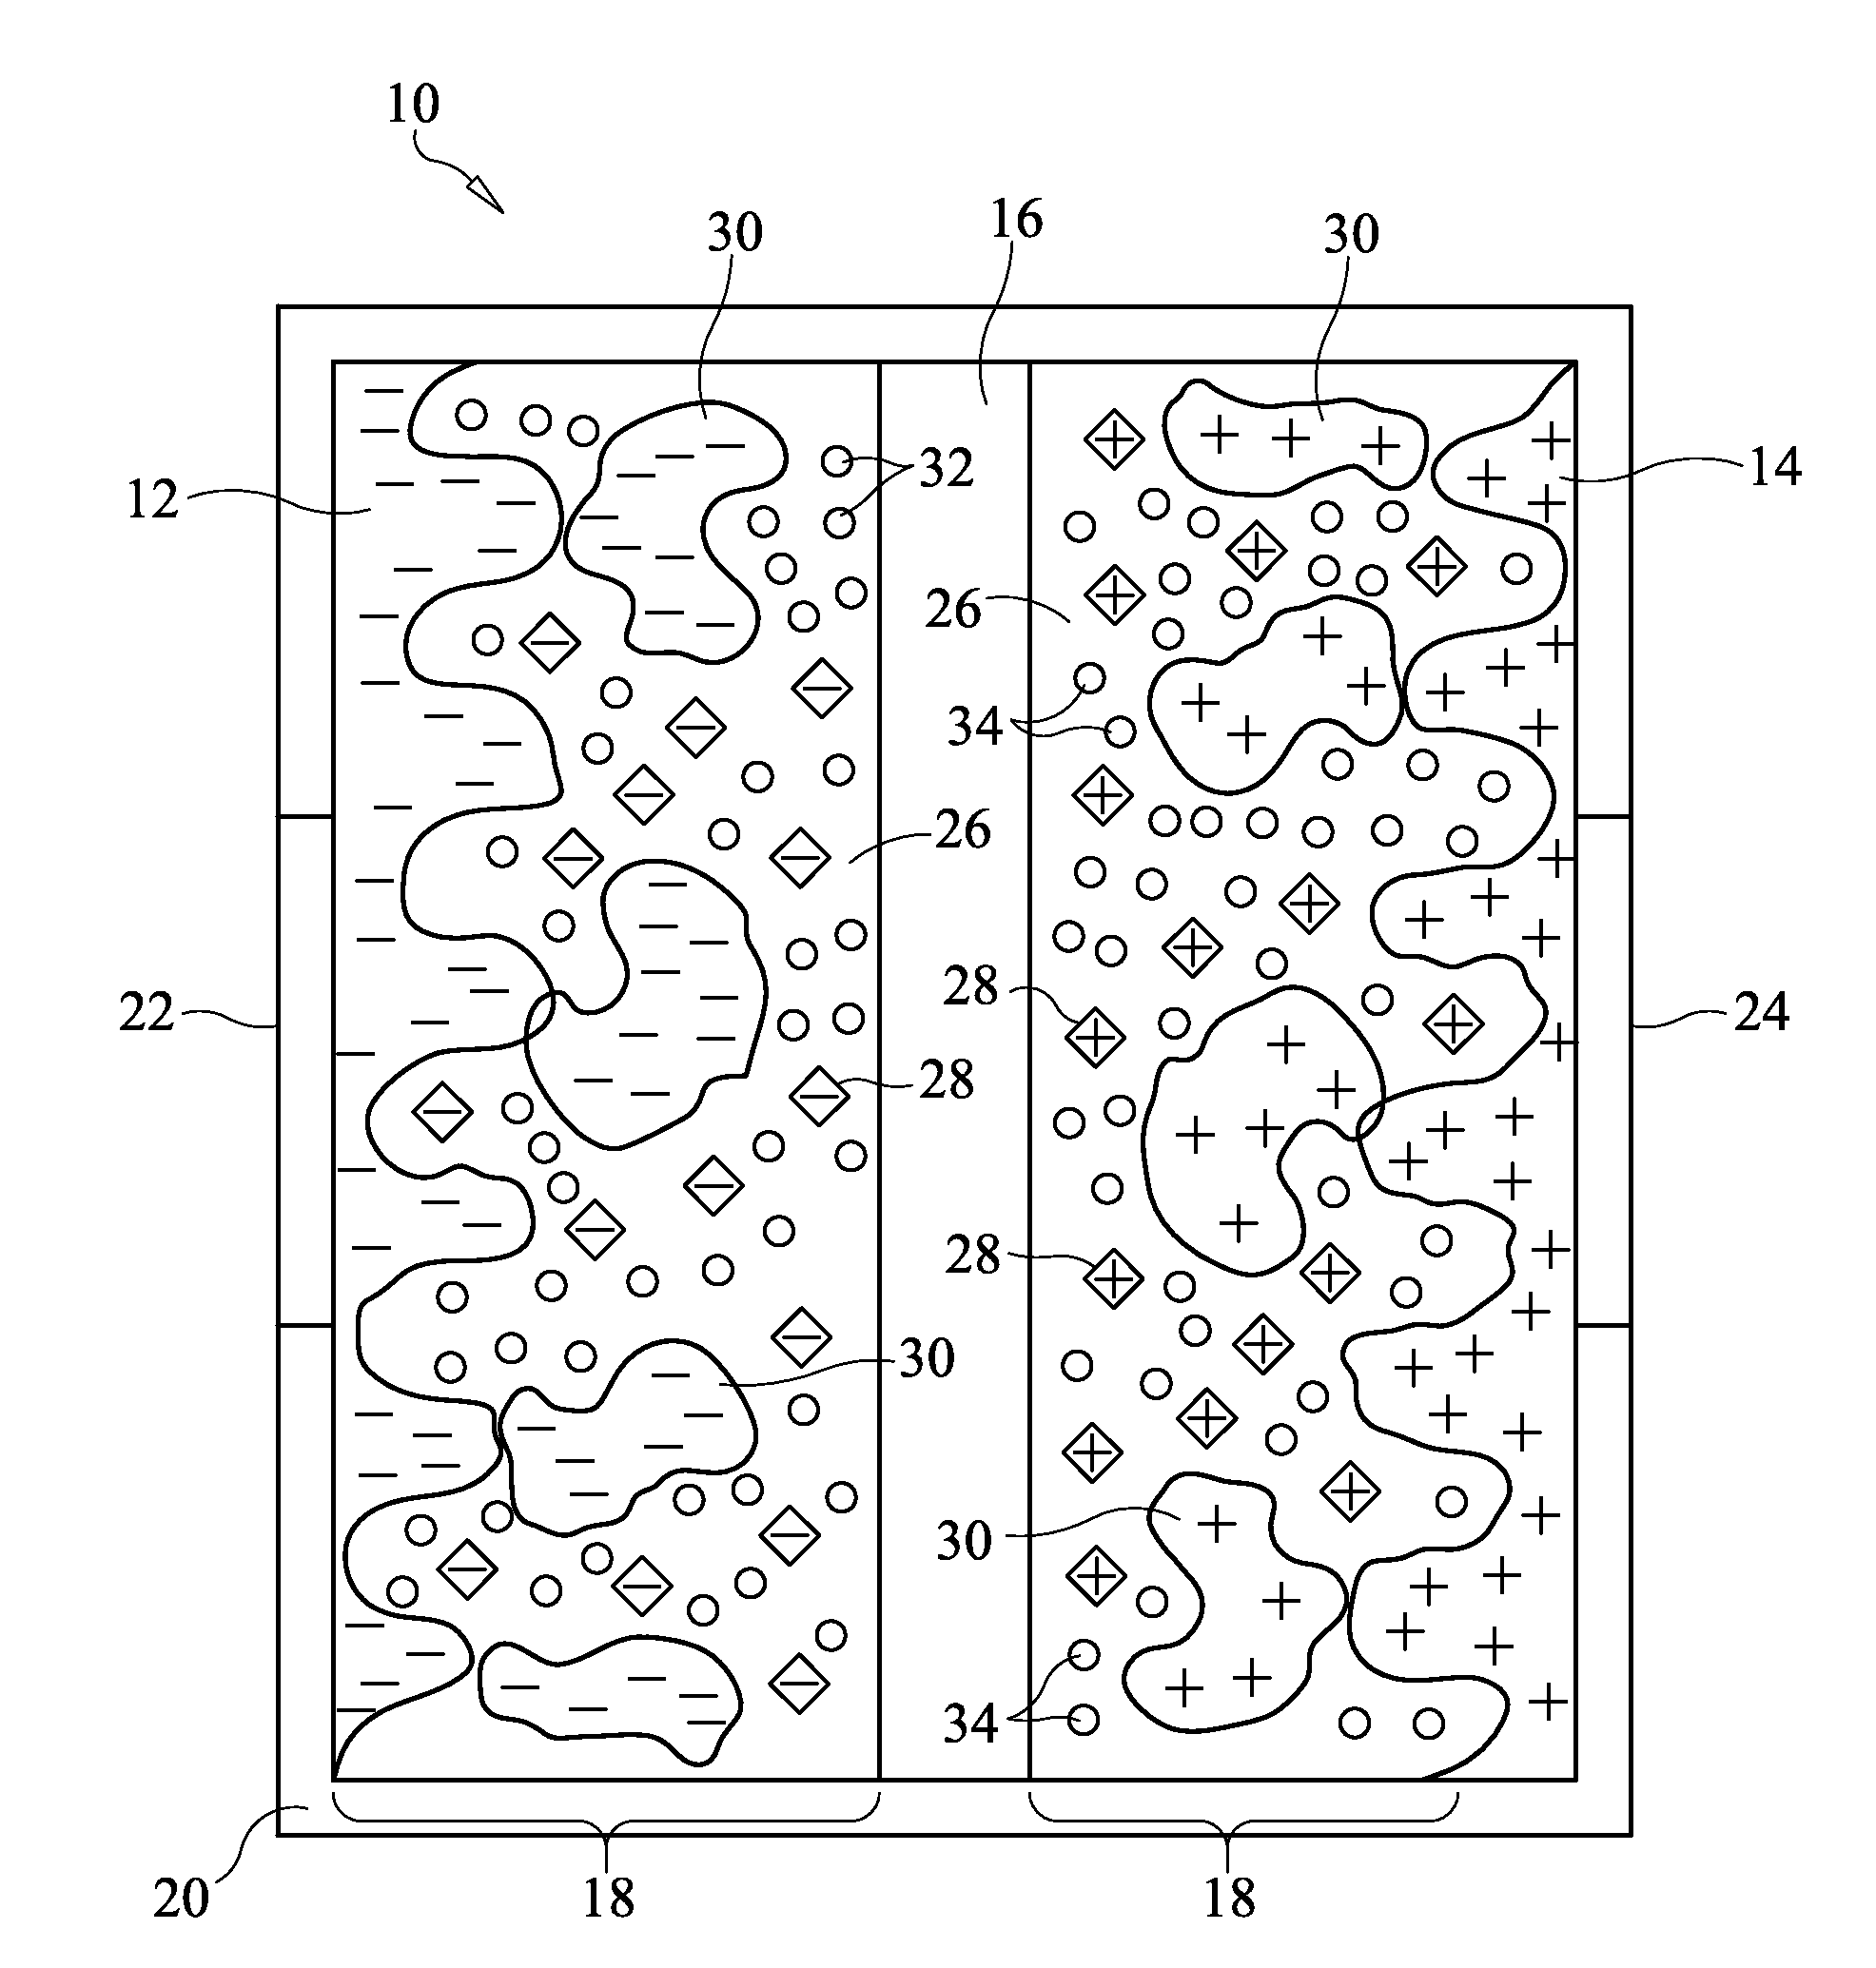 Solid state energy storage device and method